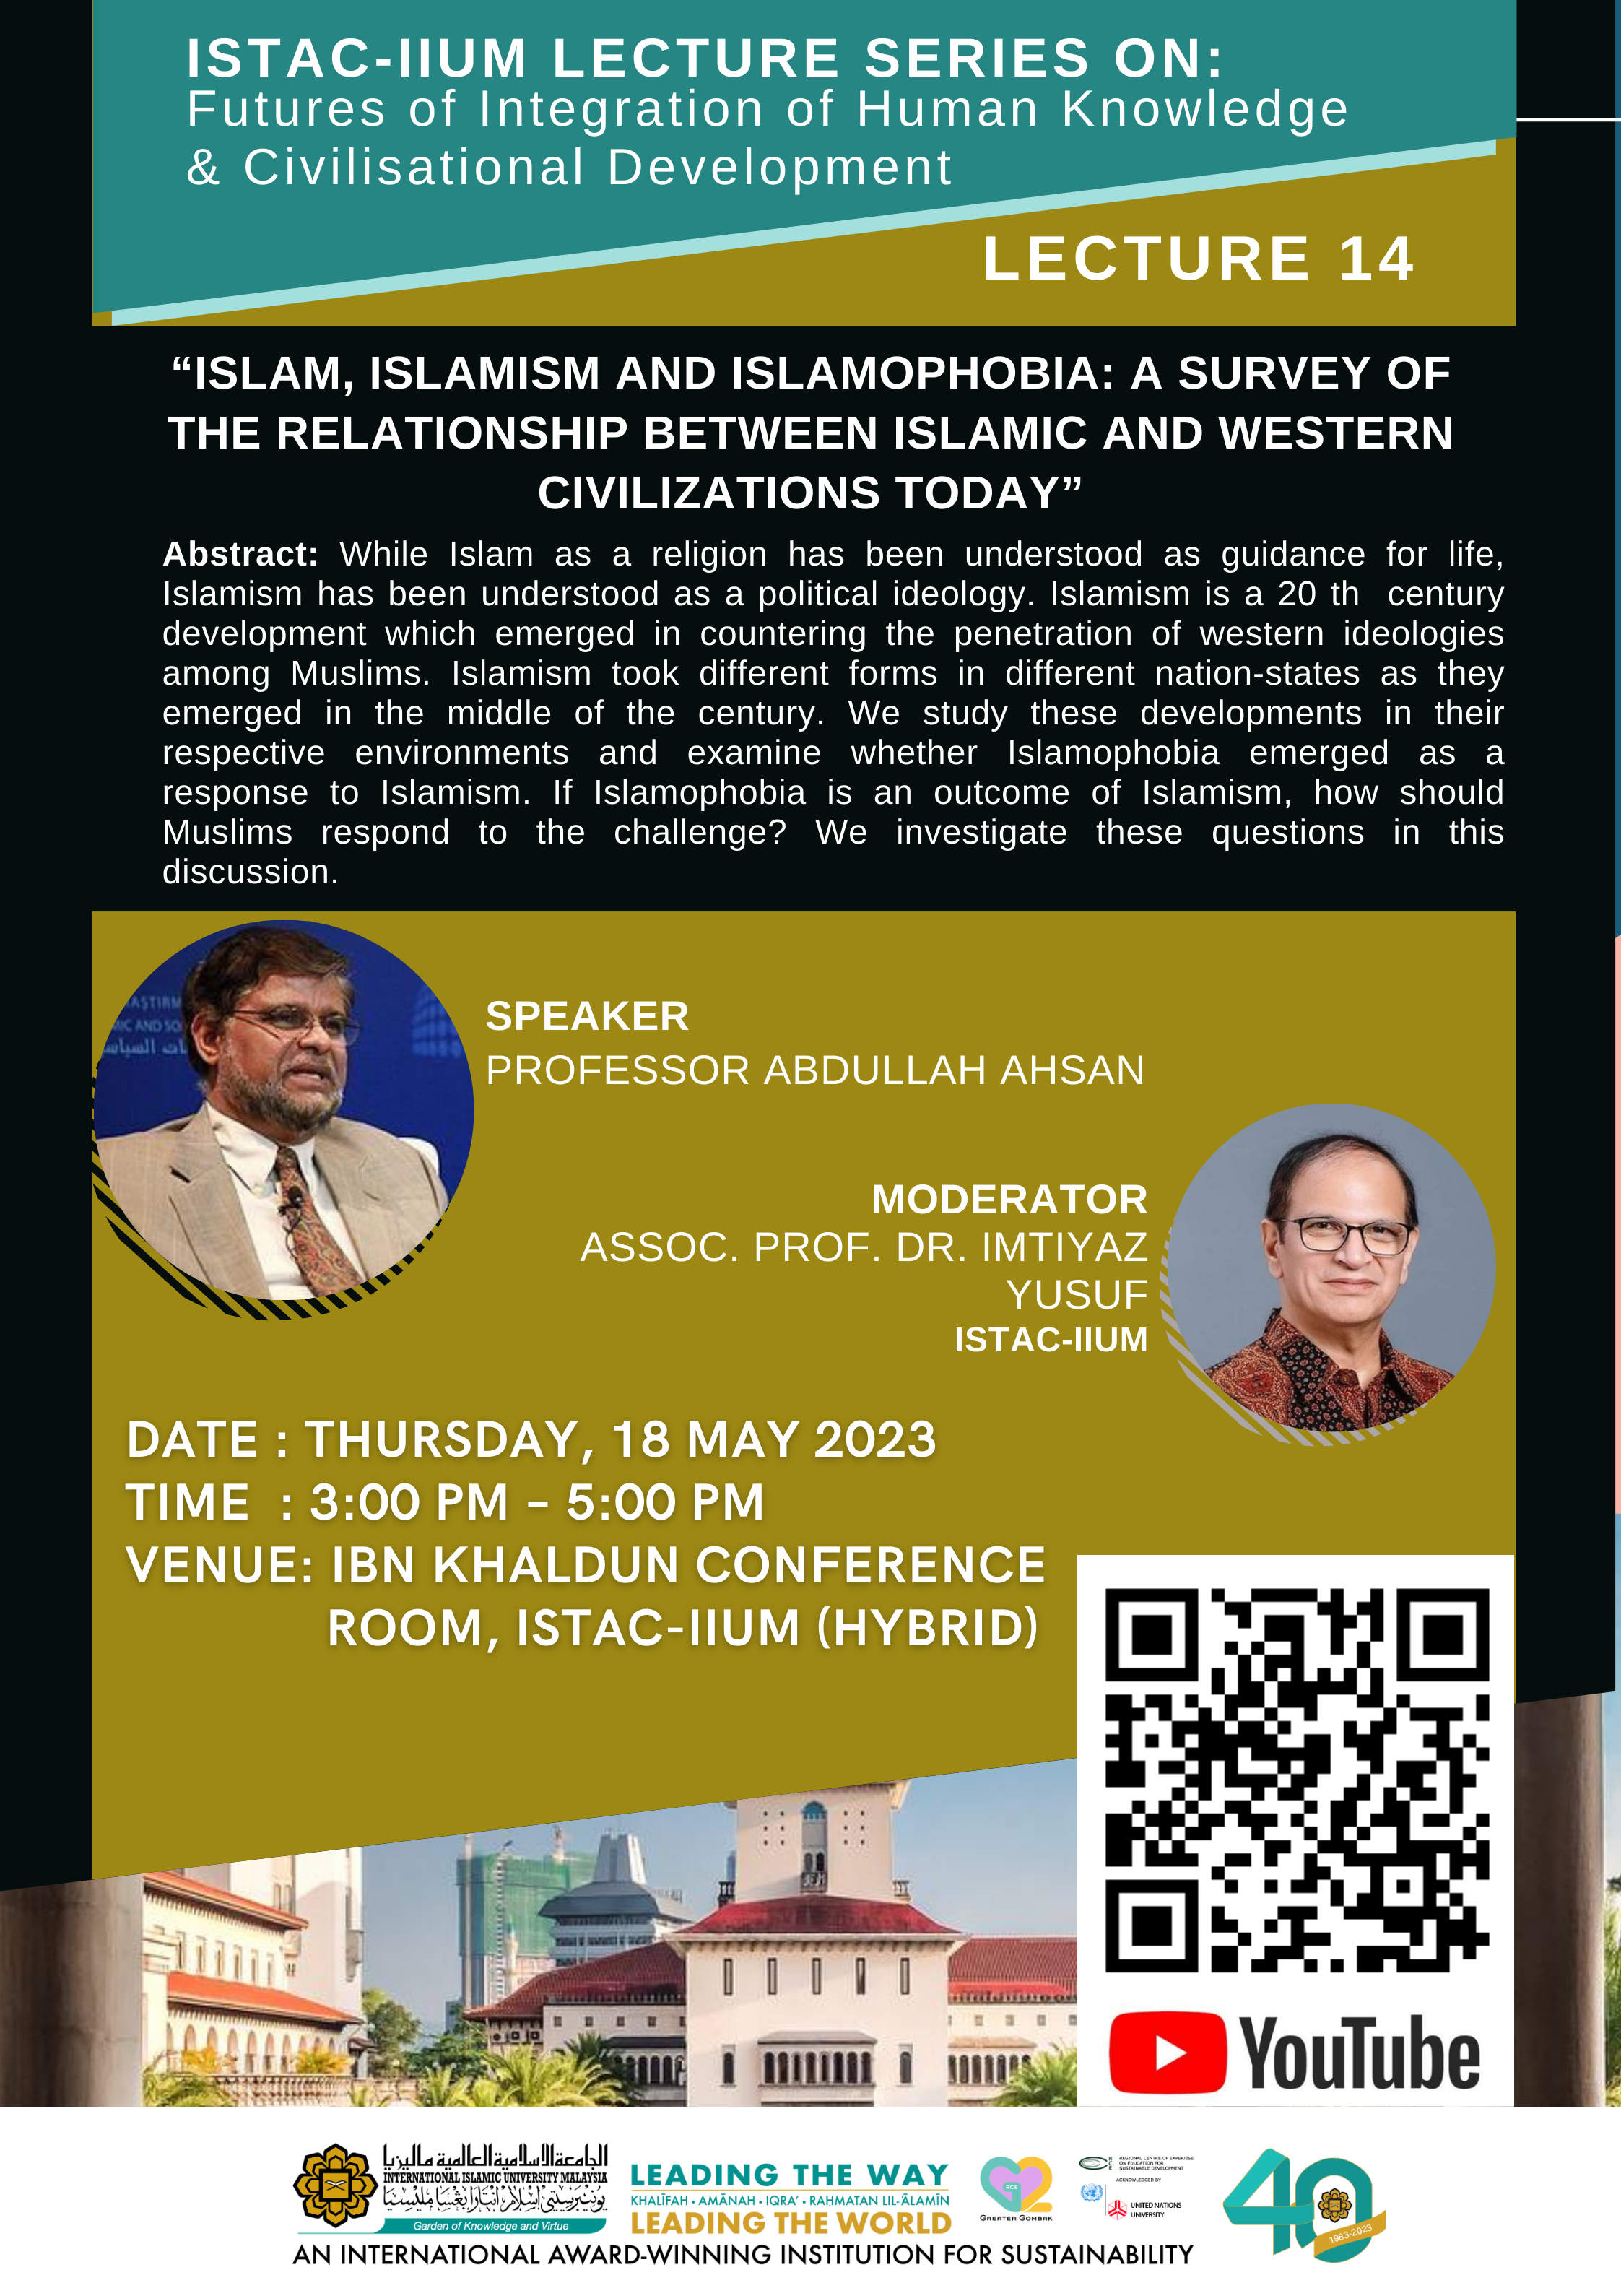 ISTAC-IIUM LECTURE SERIES ON FUTURES OF INTEGRATION OF HUMAN KNOWLEDGE & CIVILISATIONAL DEVELOPMENT_LECTURE 14